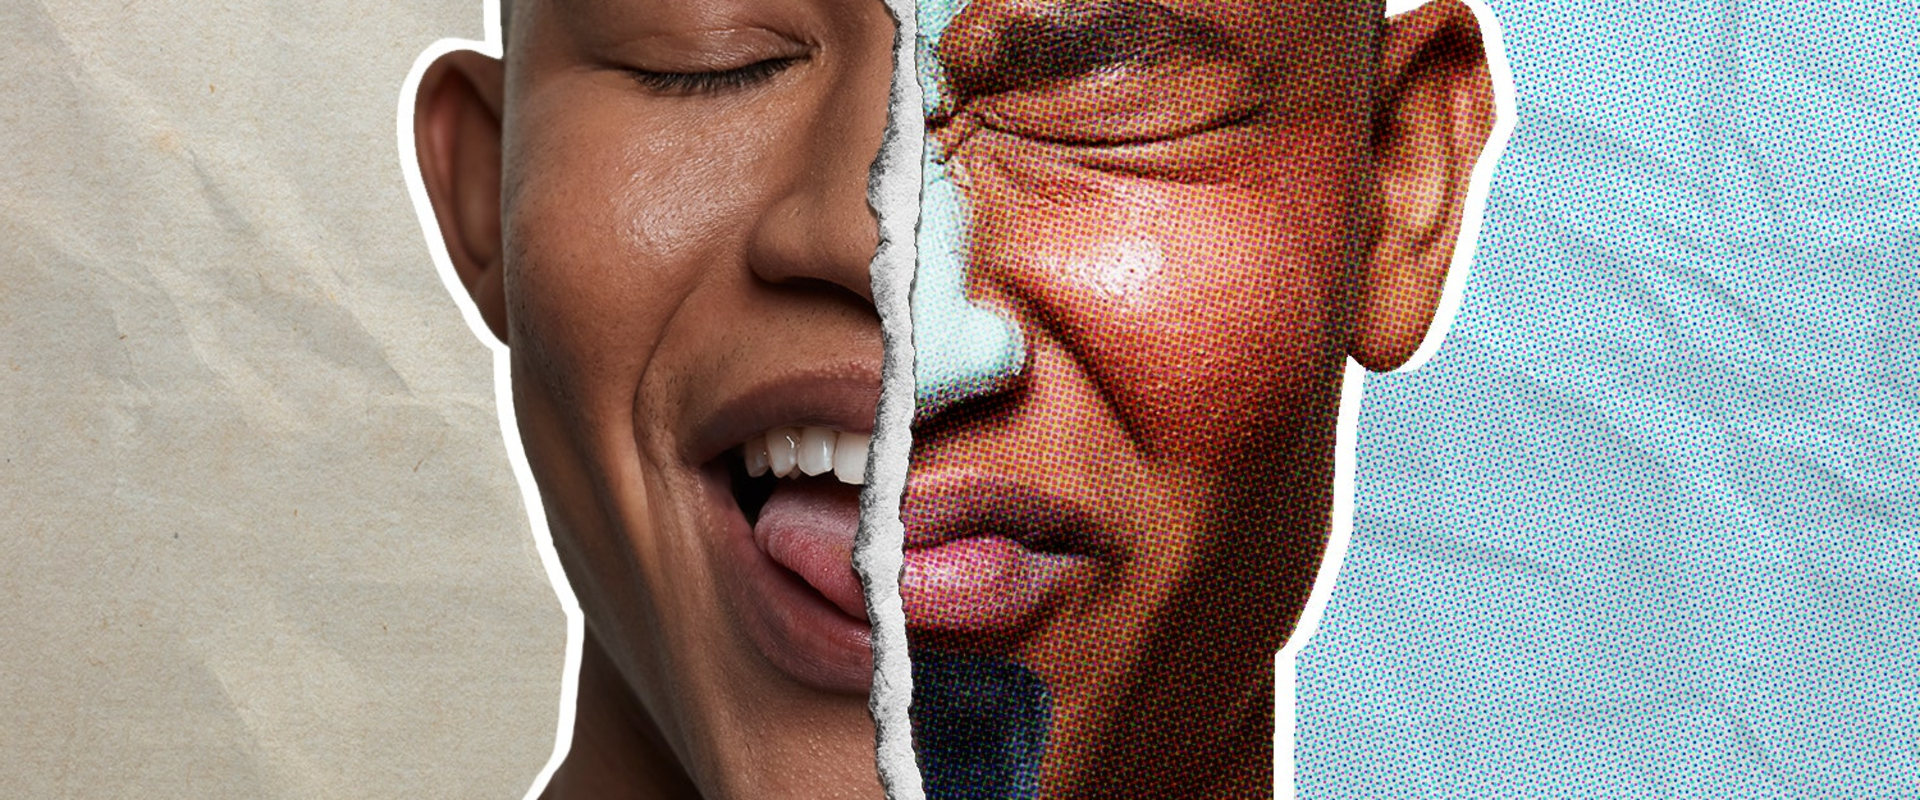 The Ultimate Guide to the Best Men's Skincare for Dry Skin